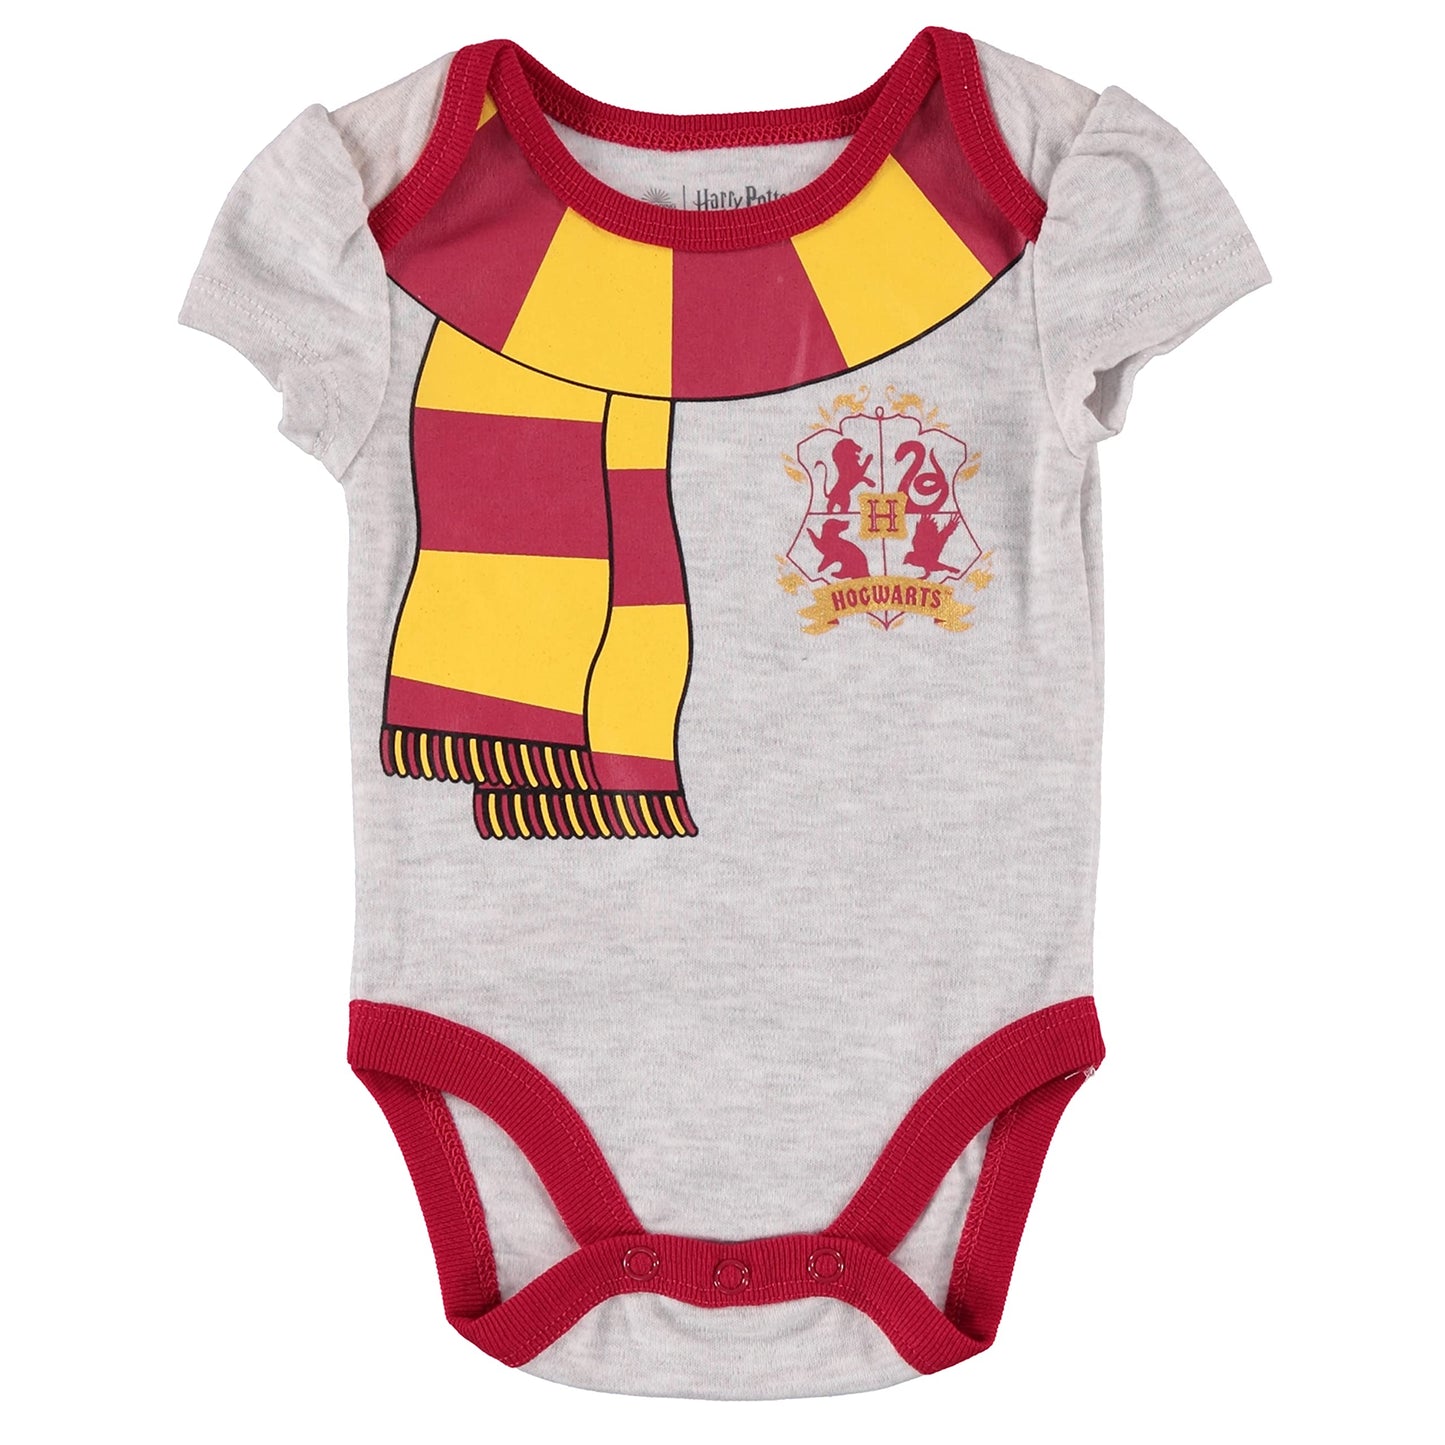 Harry Potter Baby Girls Bodysuit One Piece Three Pack Gifts for Baby Girls (Pink/White/Red, 6-9 Months)